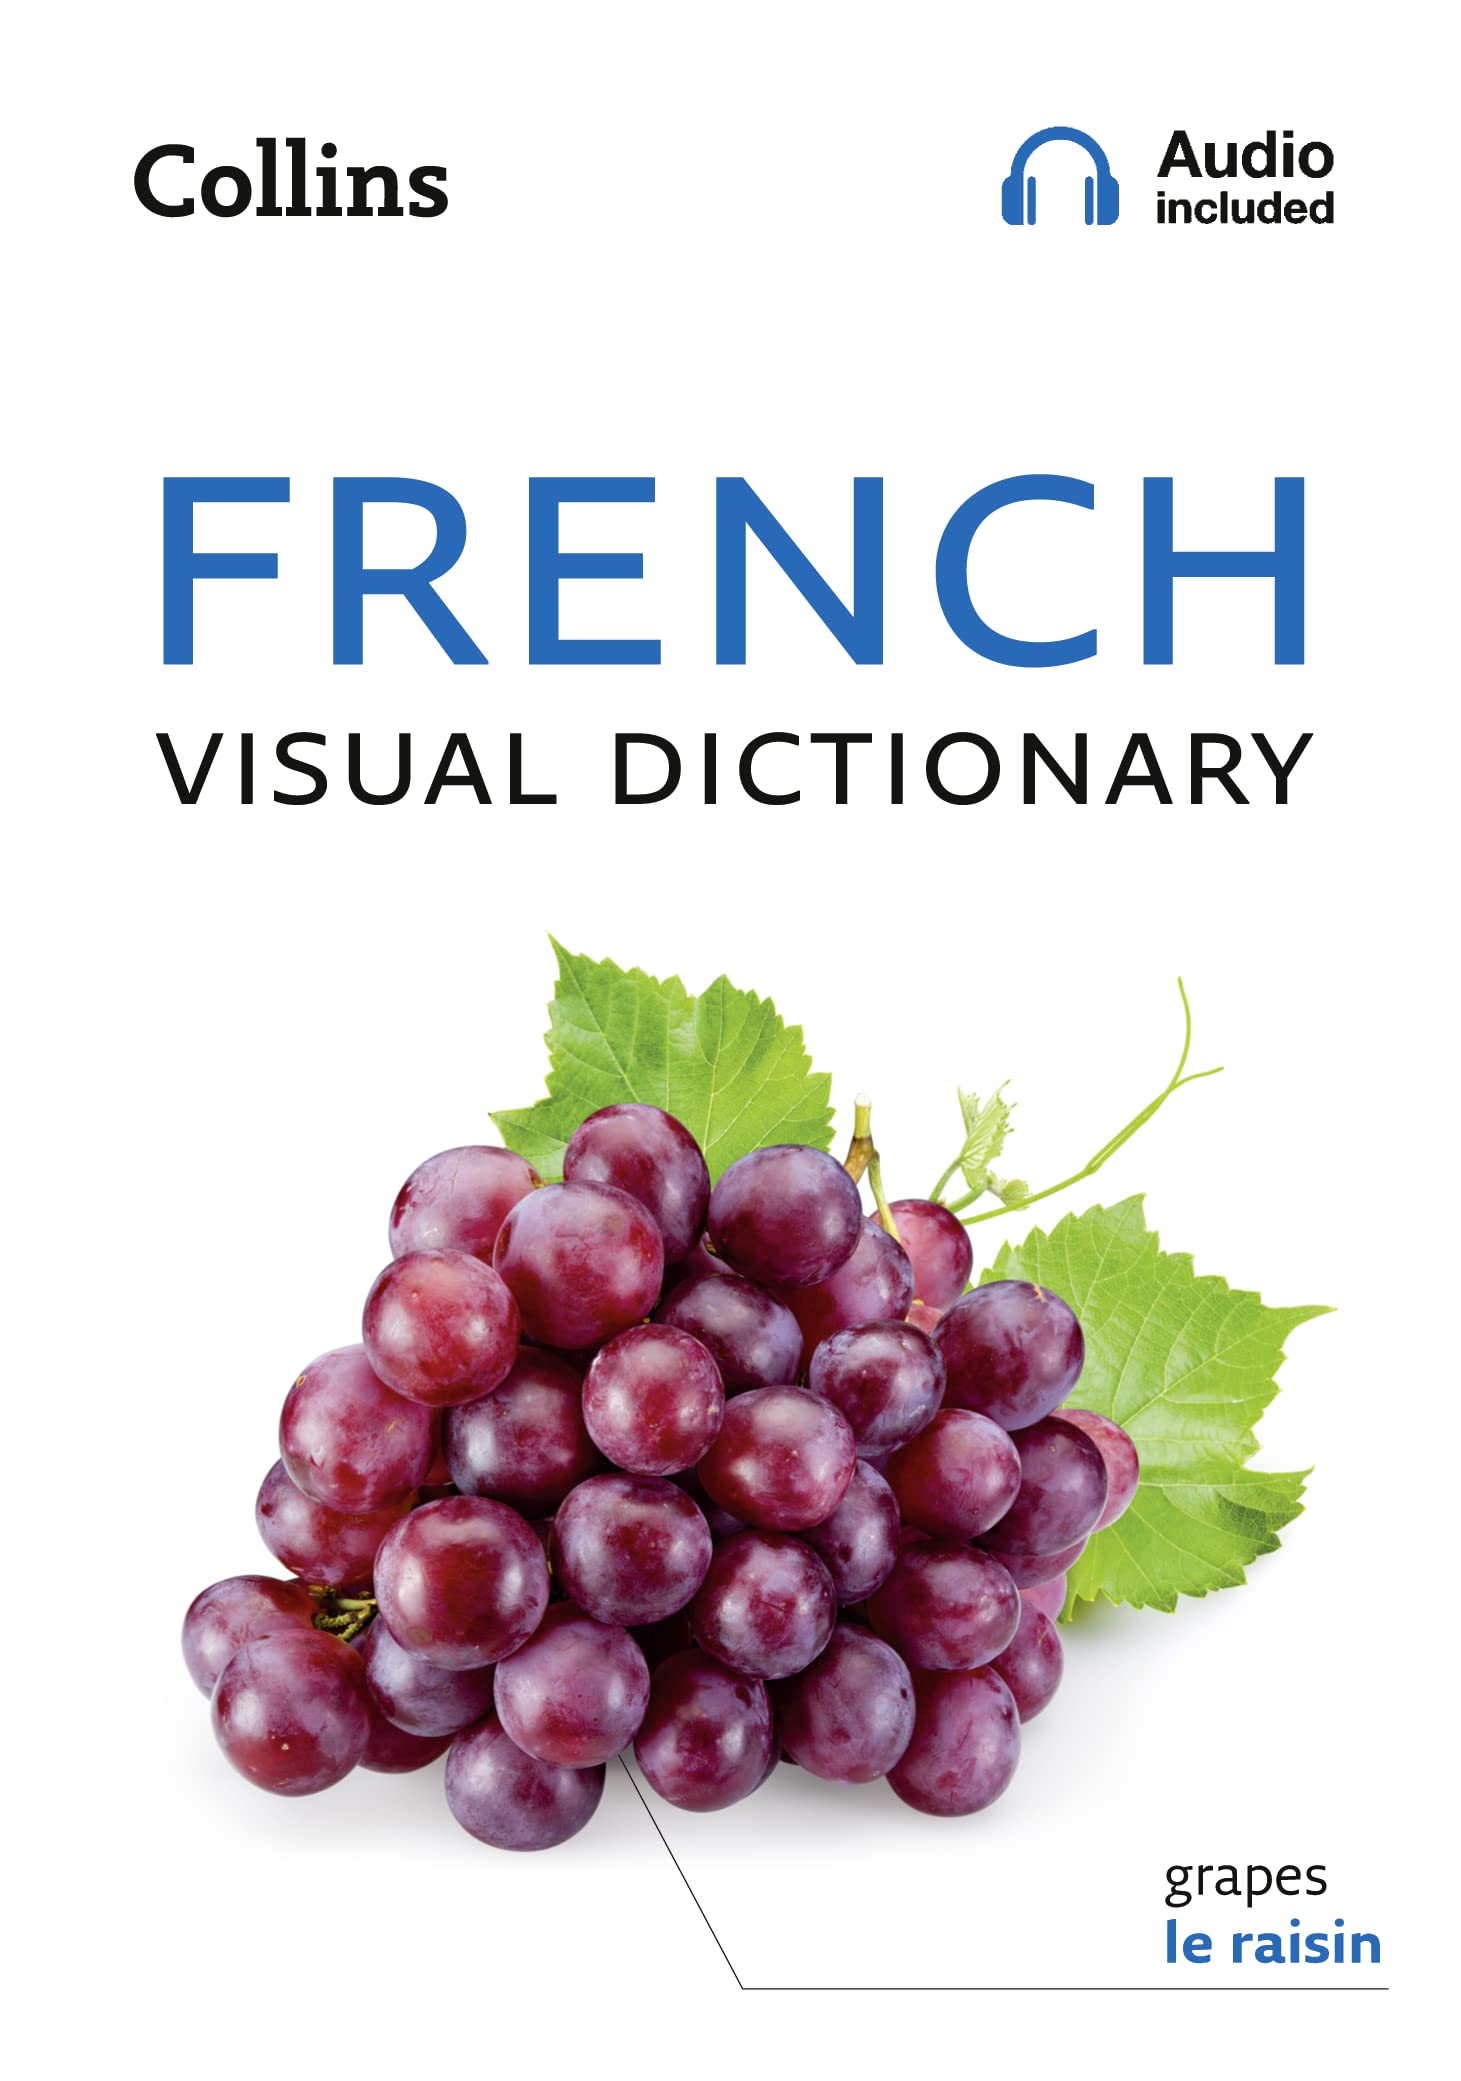 Collins Visual Dictionary: French